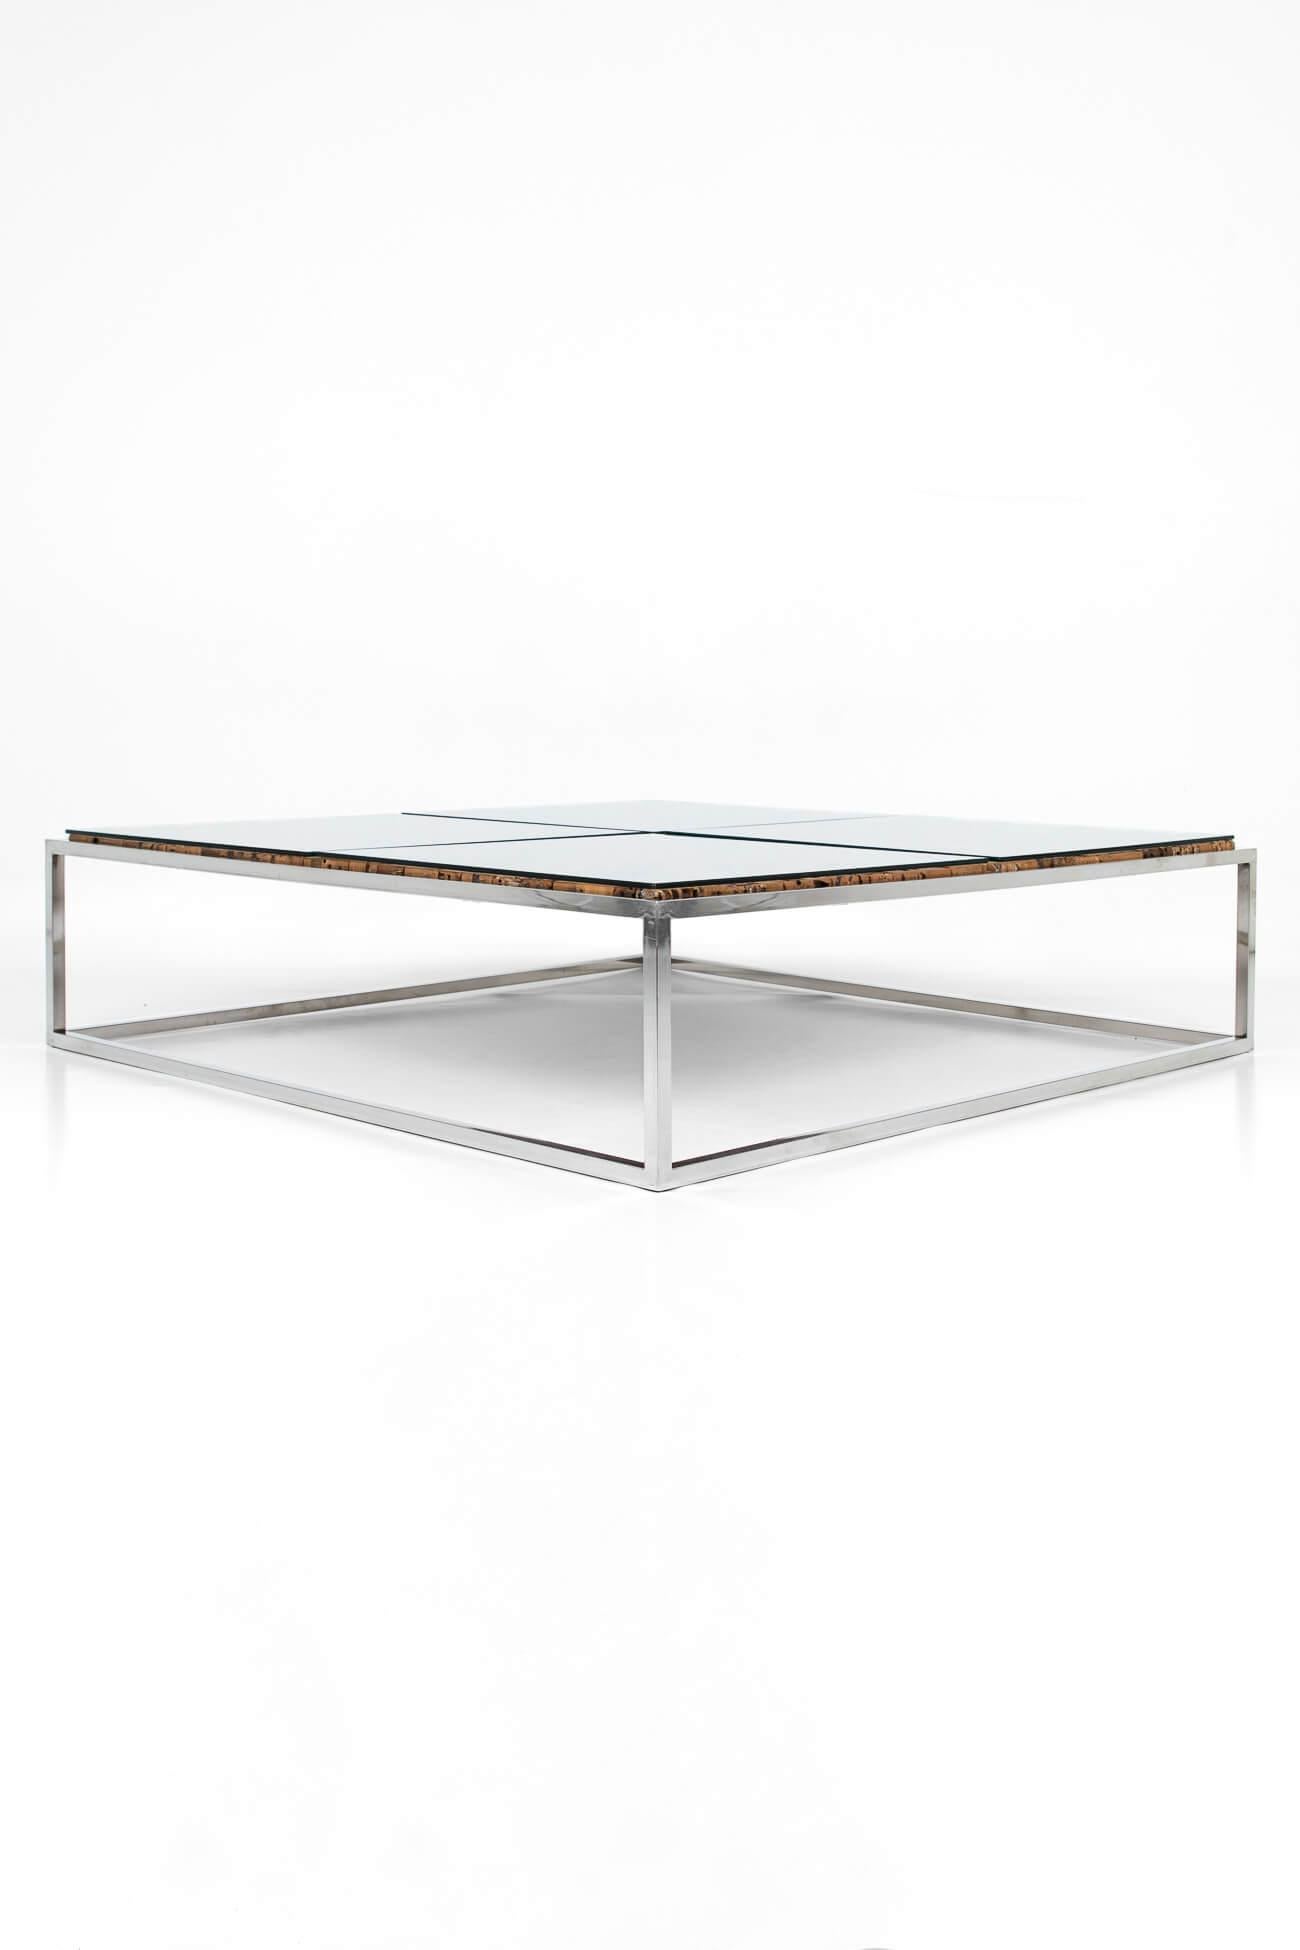 Stunning square chrome and wooden cork effect low centre table. The gleaming chrome frame divides the rich wooden cork effect top into four sections and on top of each section sits a sheet of clear tempered glass. With incredible lines and a